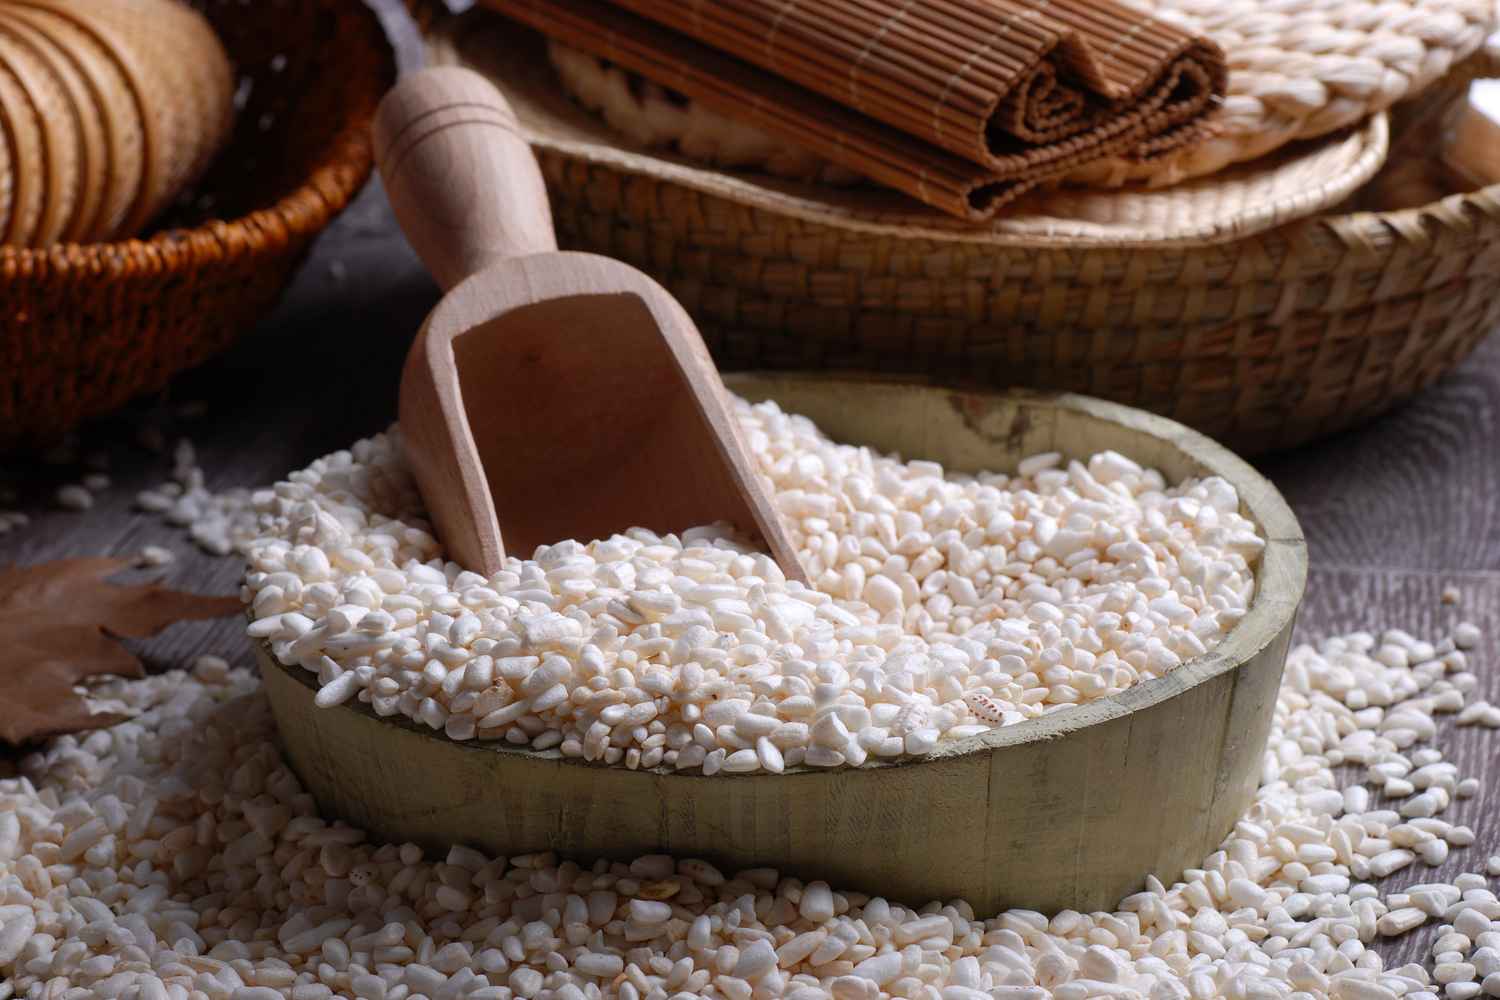 Benefits of Puffed Rice For Babies